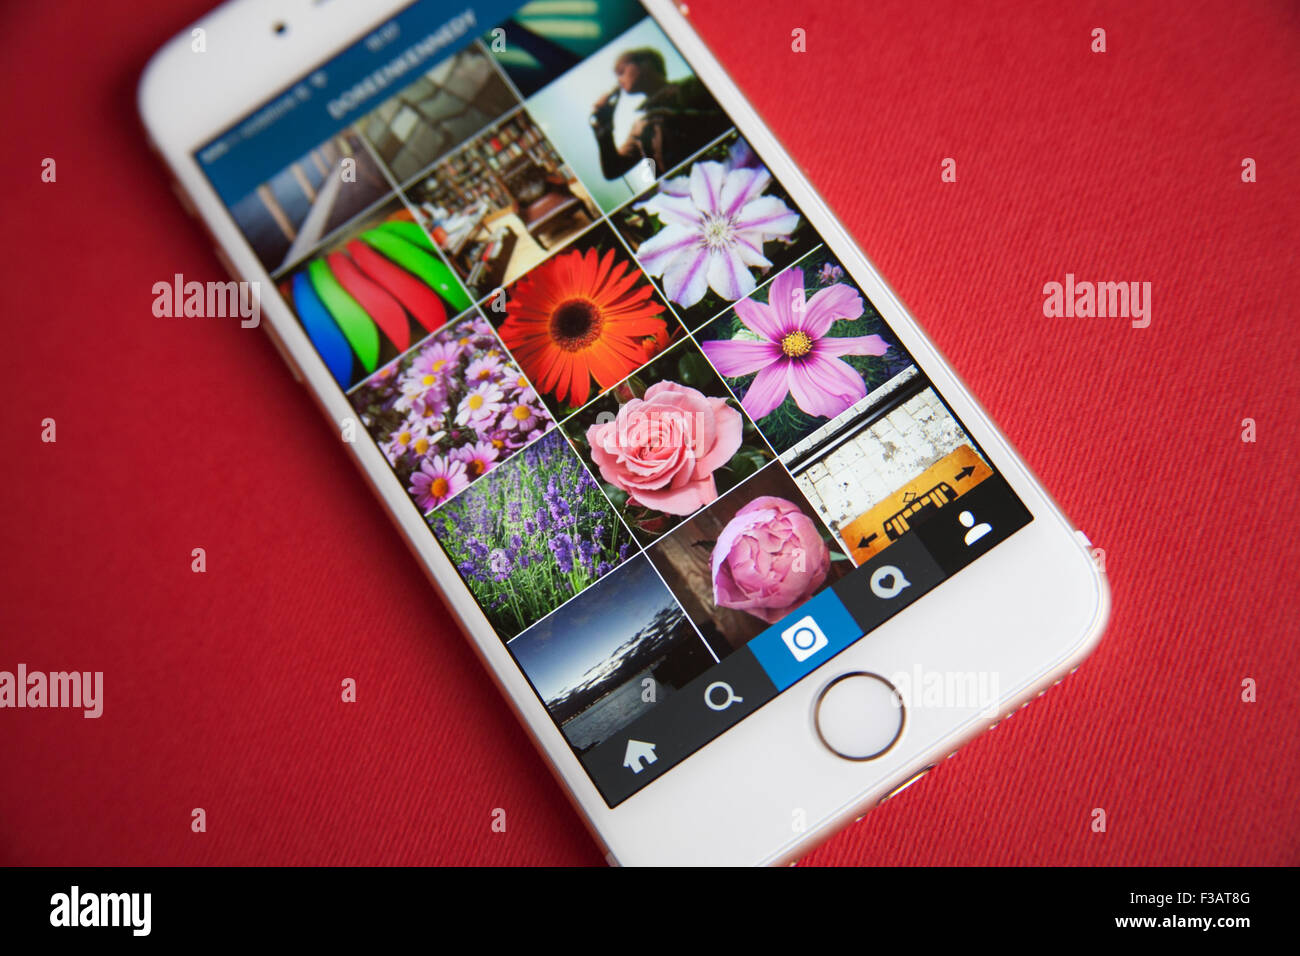 Instagram photo feed screen on a Gold and white Apple iPhone 6 against a red background Stock Photo